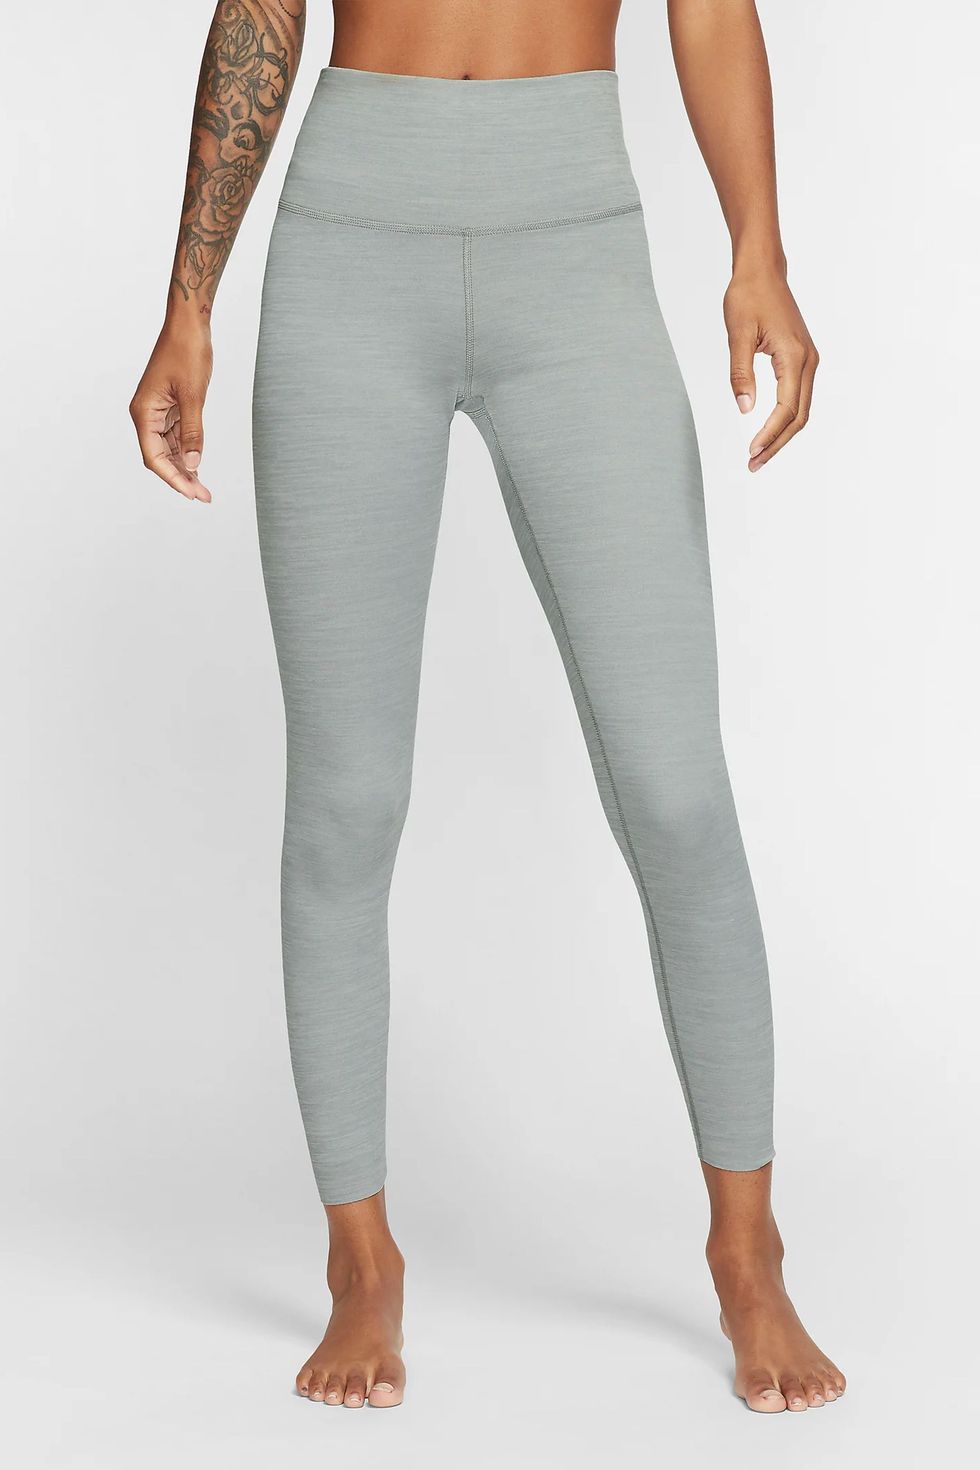 Lululemon On The Fly Pants Luxtreme Dk Olive Women's 8 Free